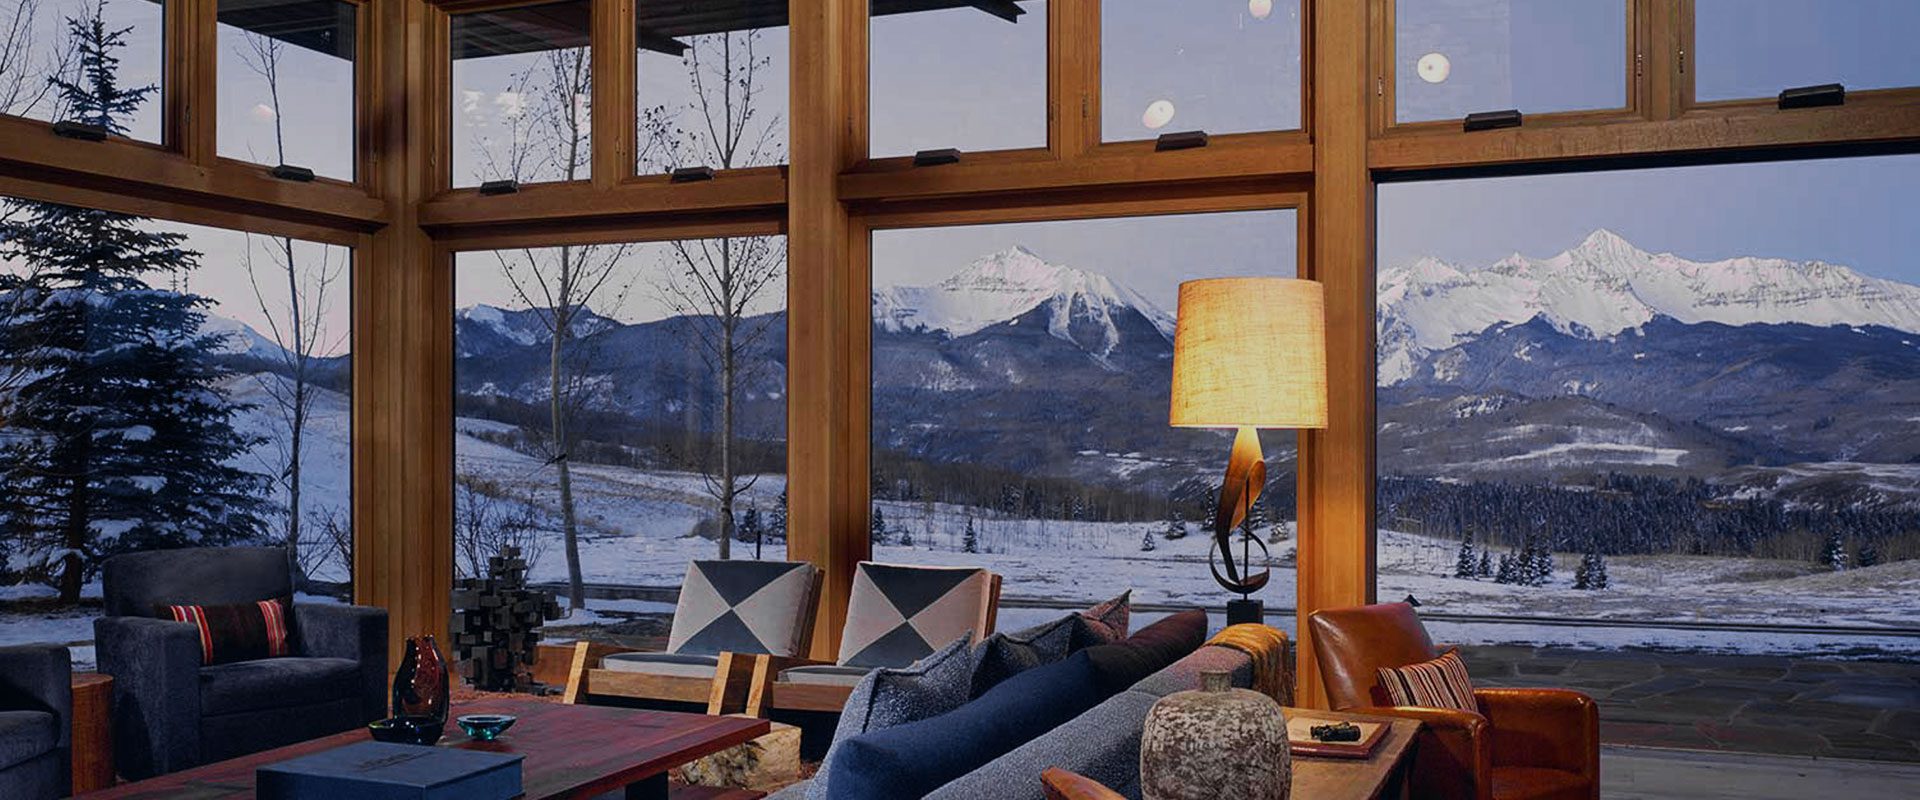 Looking through large custom wooden windows to reveal a beautiful mountain landscape.